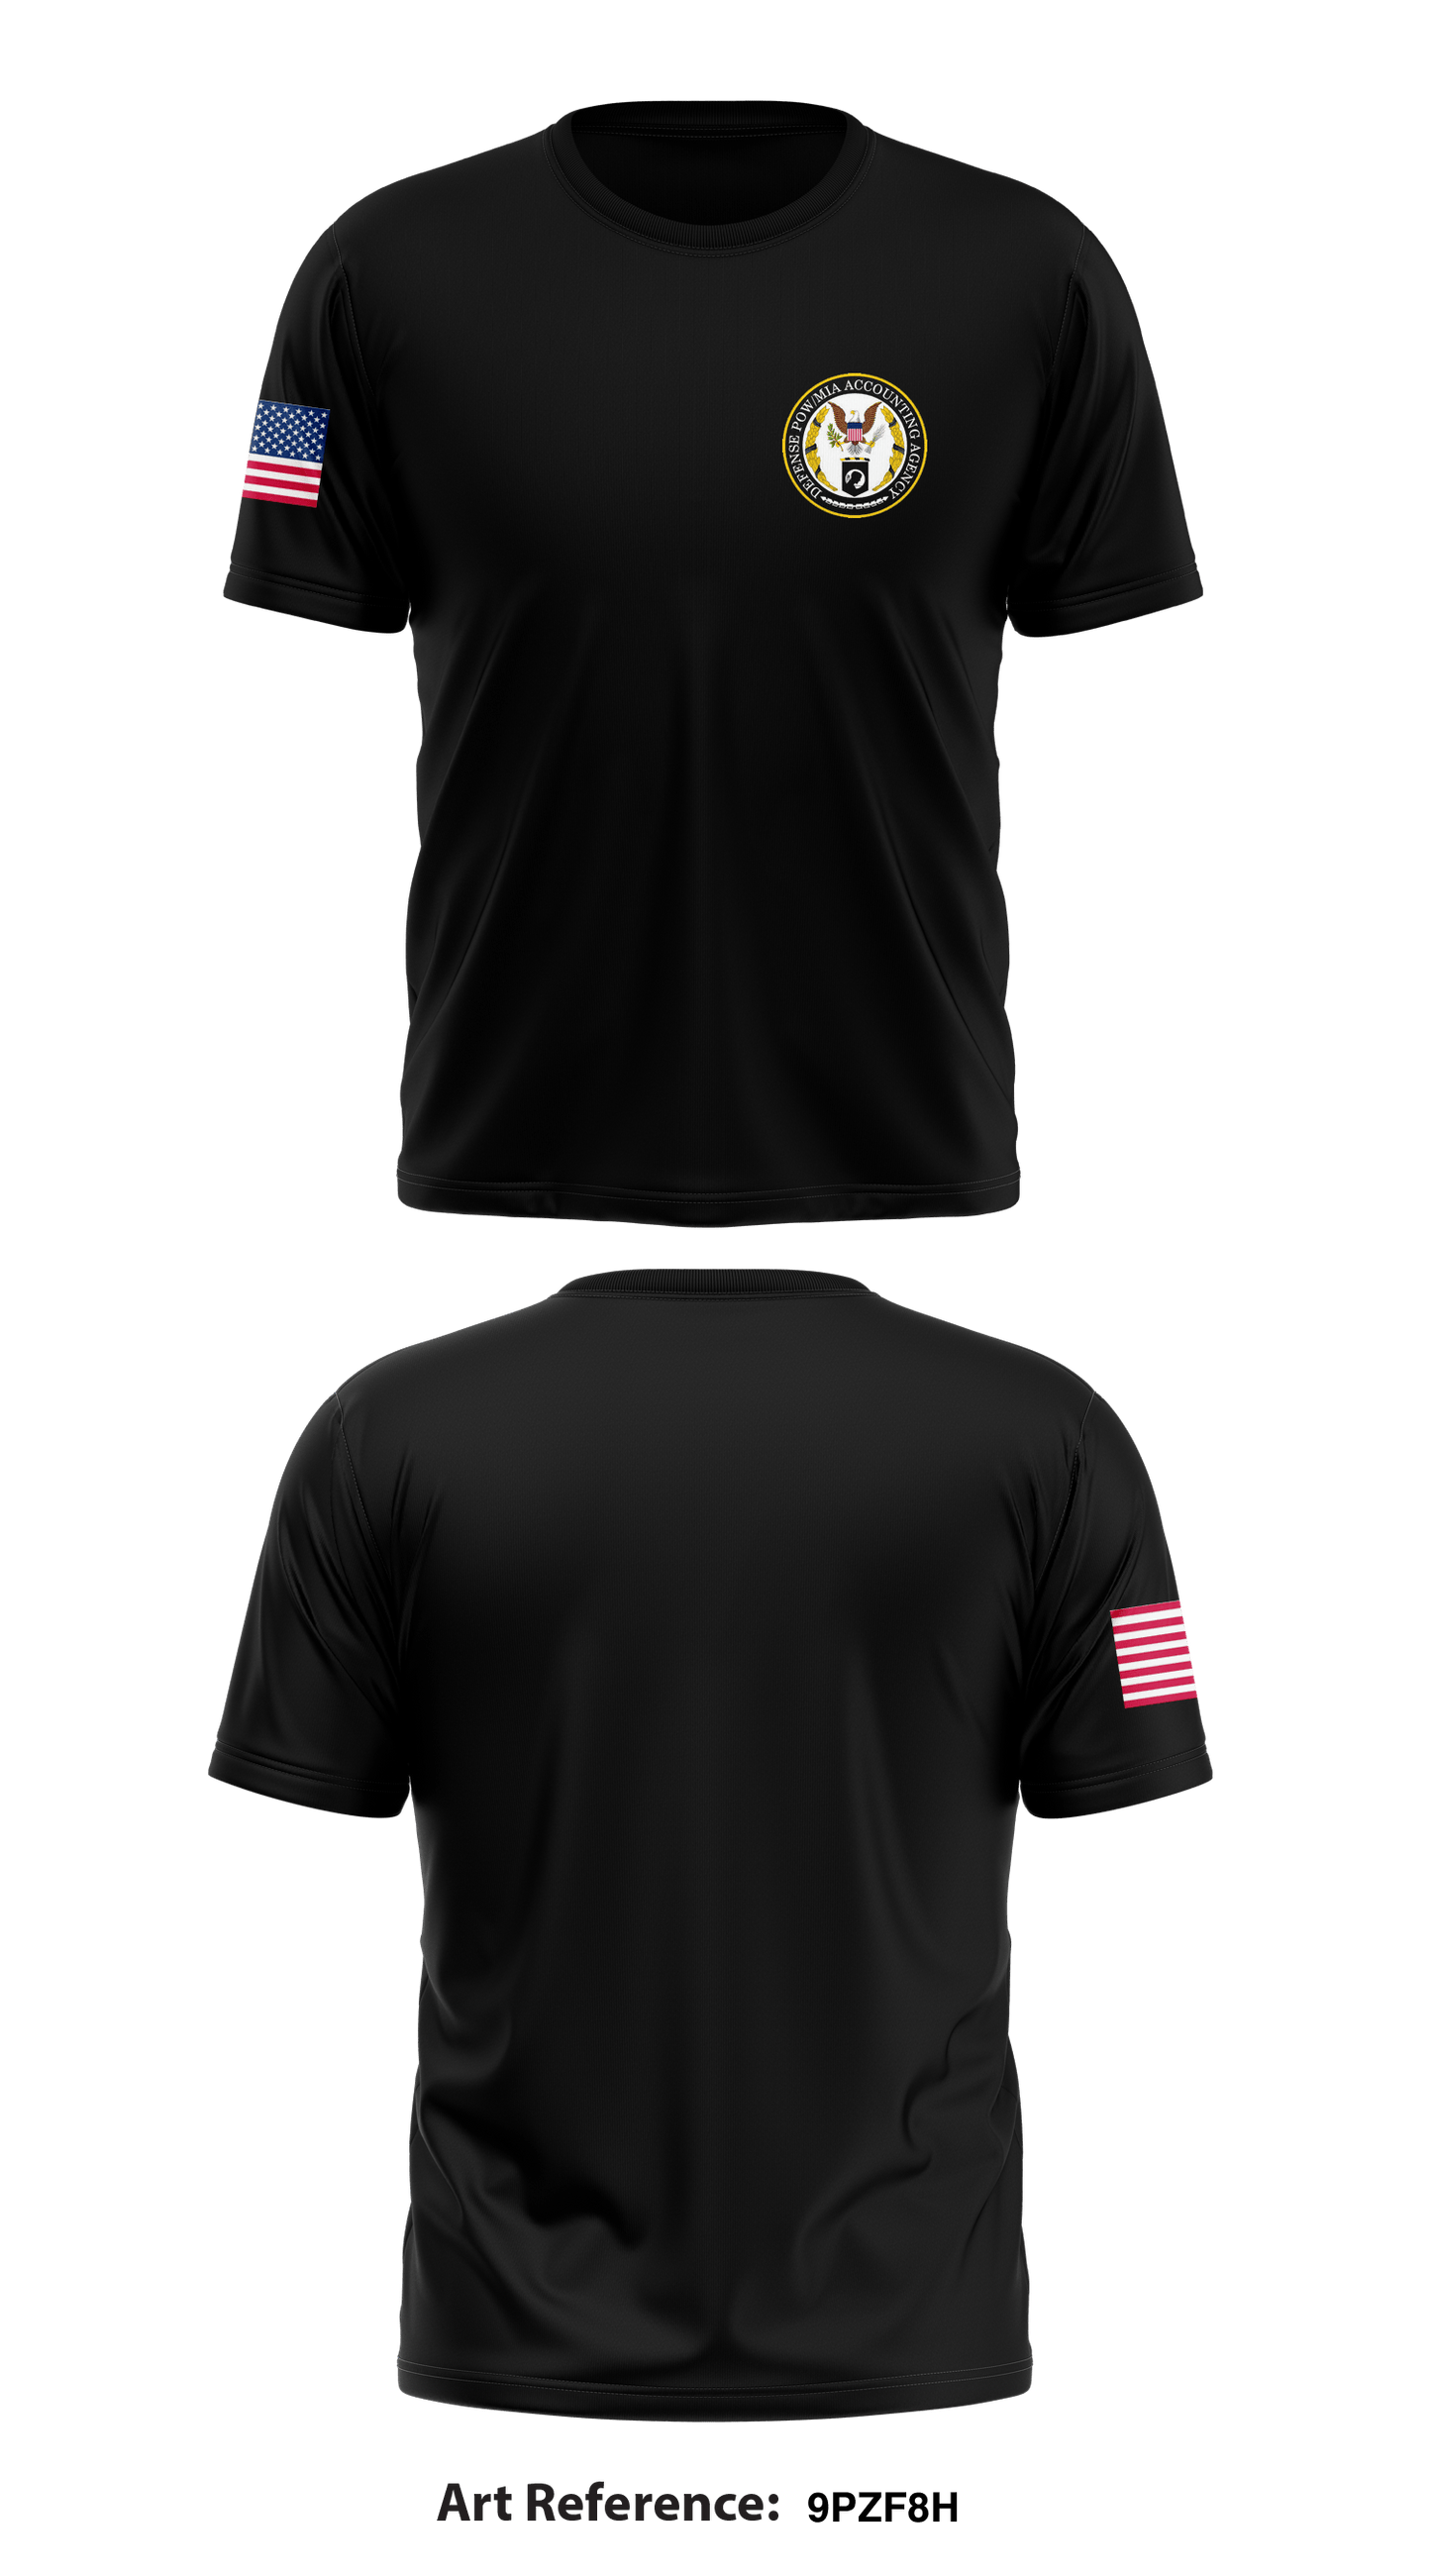 DPAA Store 1 Core Men's SS Performance Tee - 9pZf8H